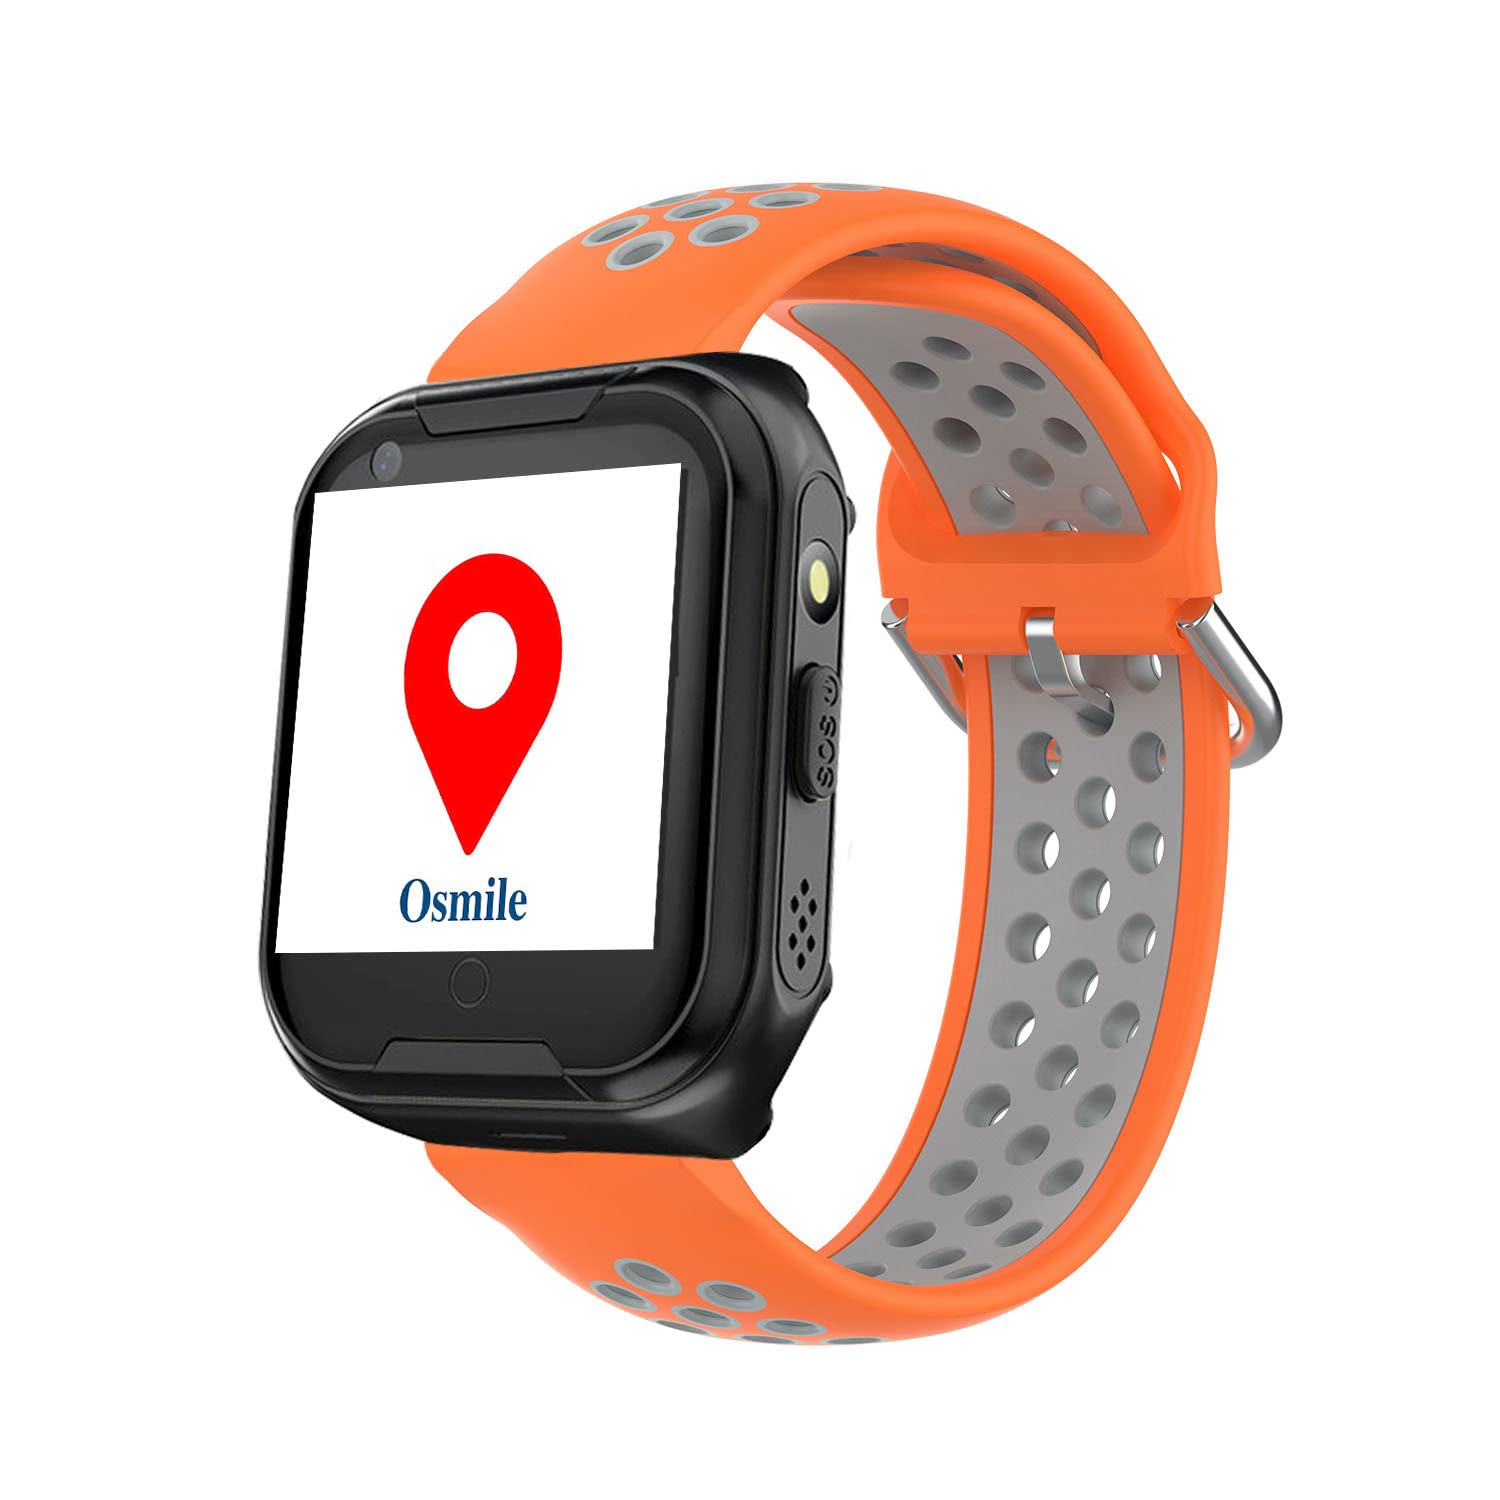 Osmile ED1000 GPS Anti-Lost Tracker for Dementia, Alzheimer & Autism Patients (GPS Watch for Elderly & Kid with SOS Call, Tracking & GeoFence Function)